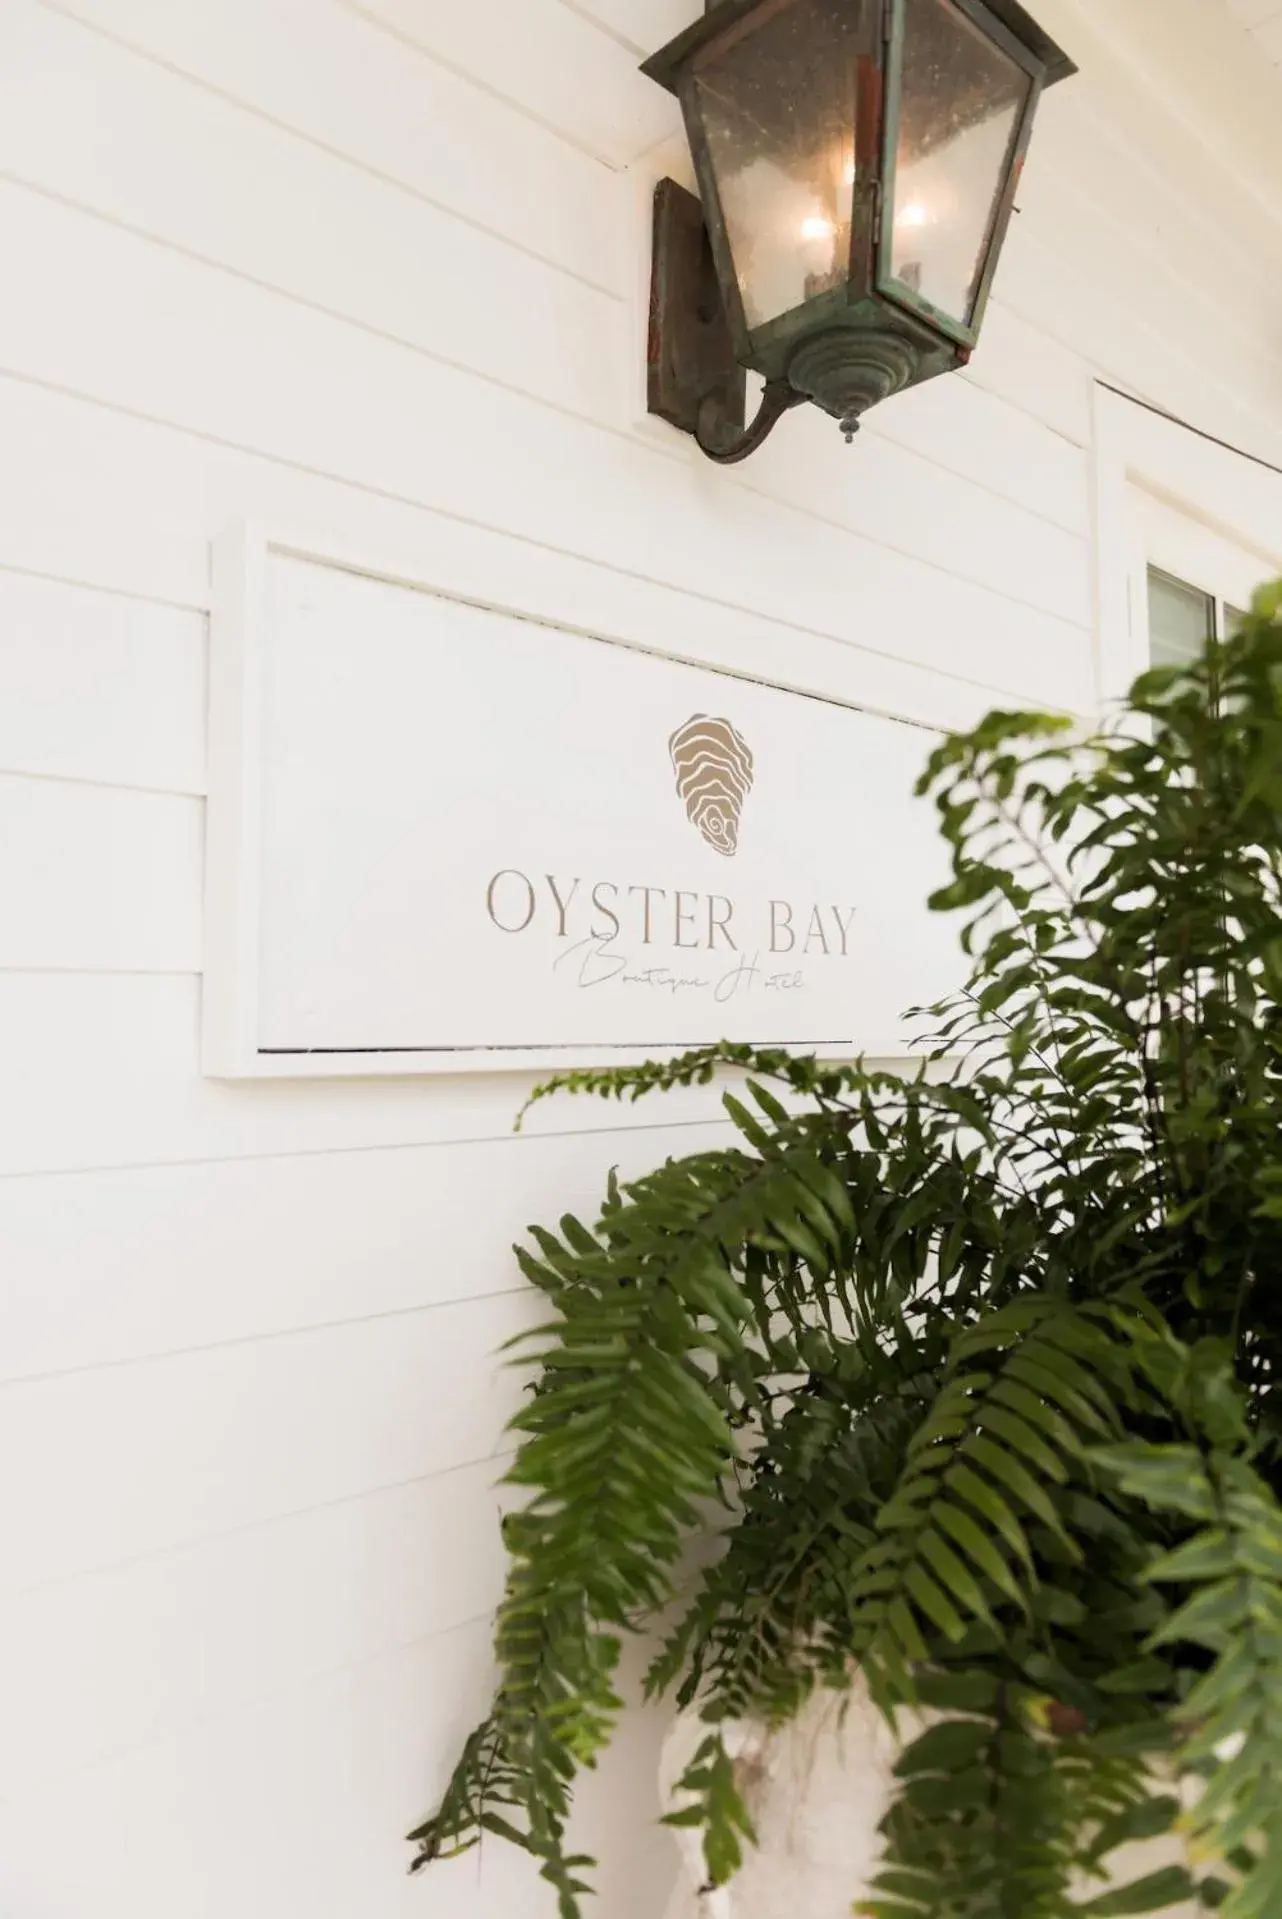 Logo/Certificate/Sign, Property Logo/Sign in Oyster Bay Boutique Hotel